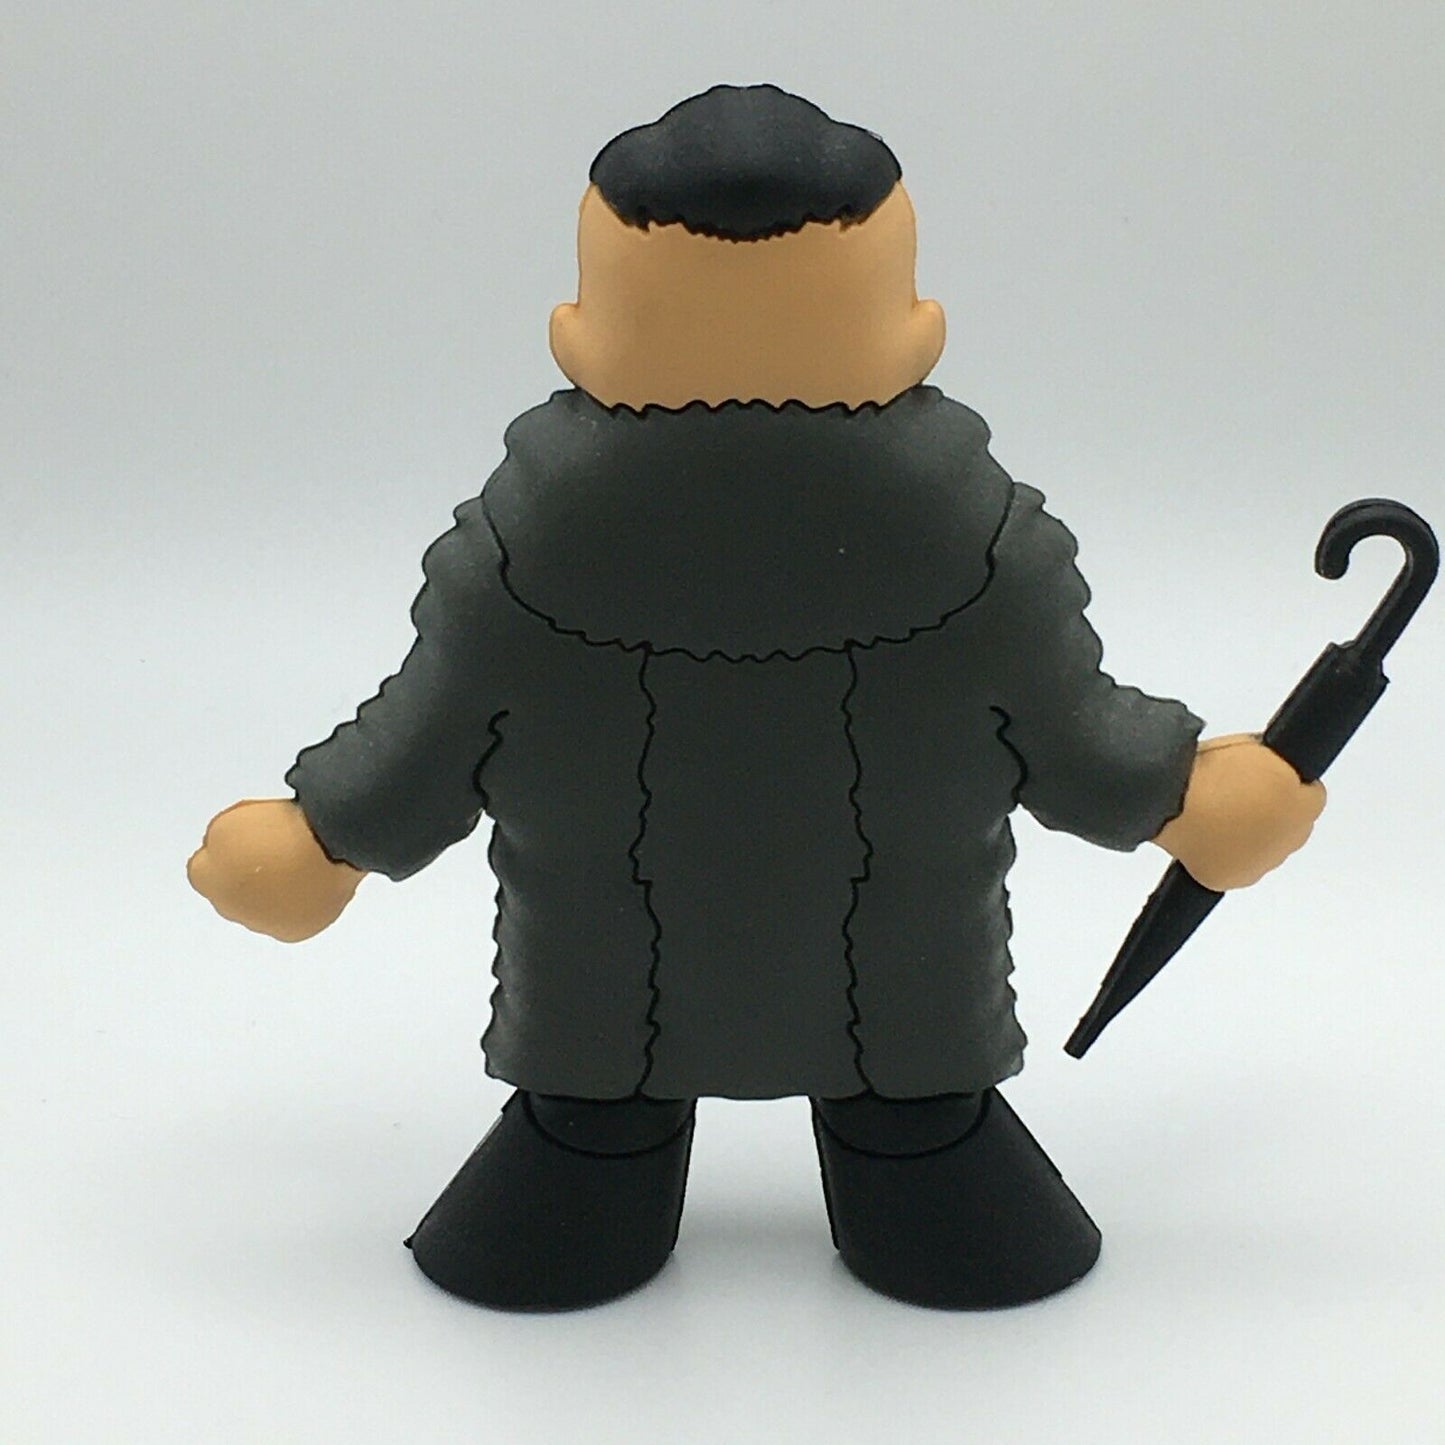 2017 Pro Wrestling Tees Crate Exclusive Micro Brawlers "Villain" Marty Scurll [July]